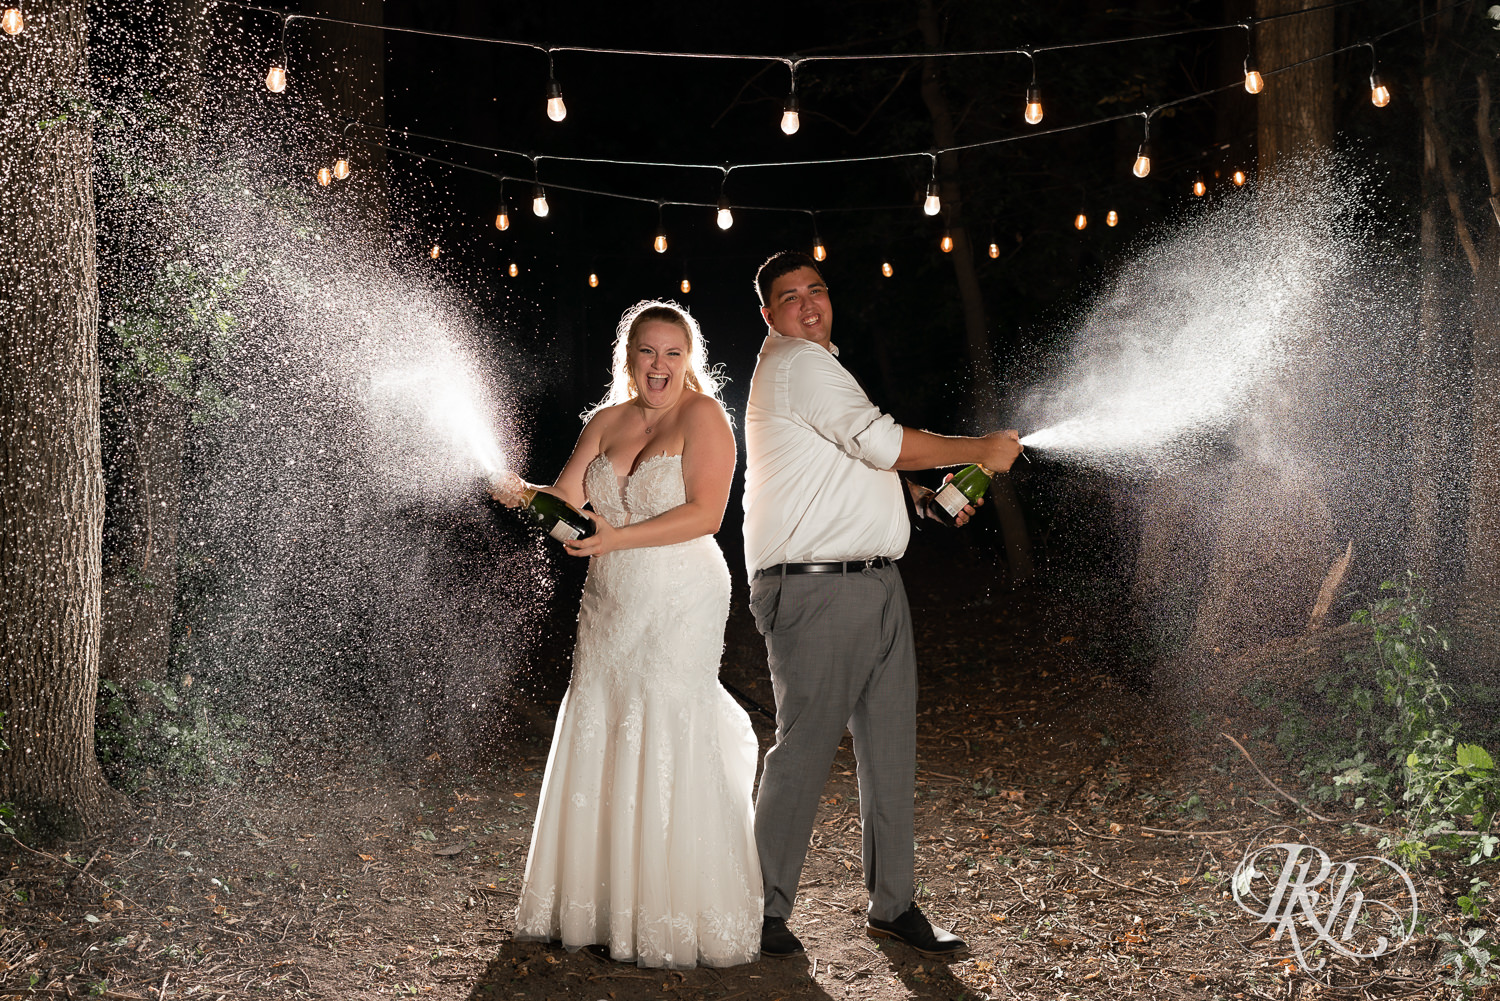 Bride and groom spray champagne at night at Cottage Farmhouse in Glencoe, Minnesota.